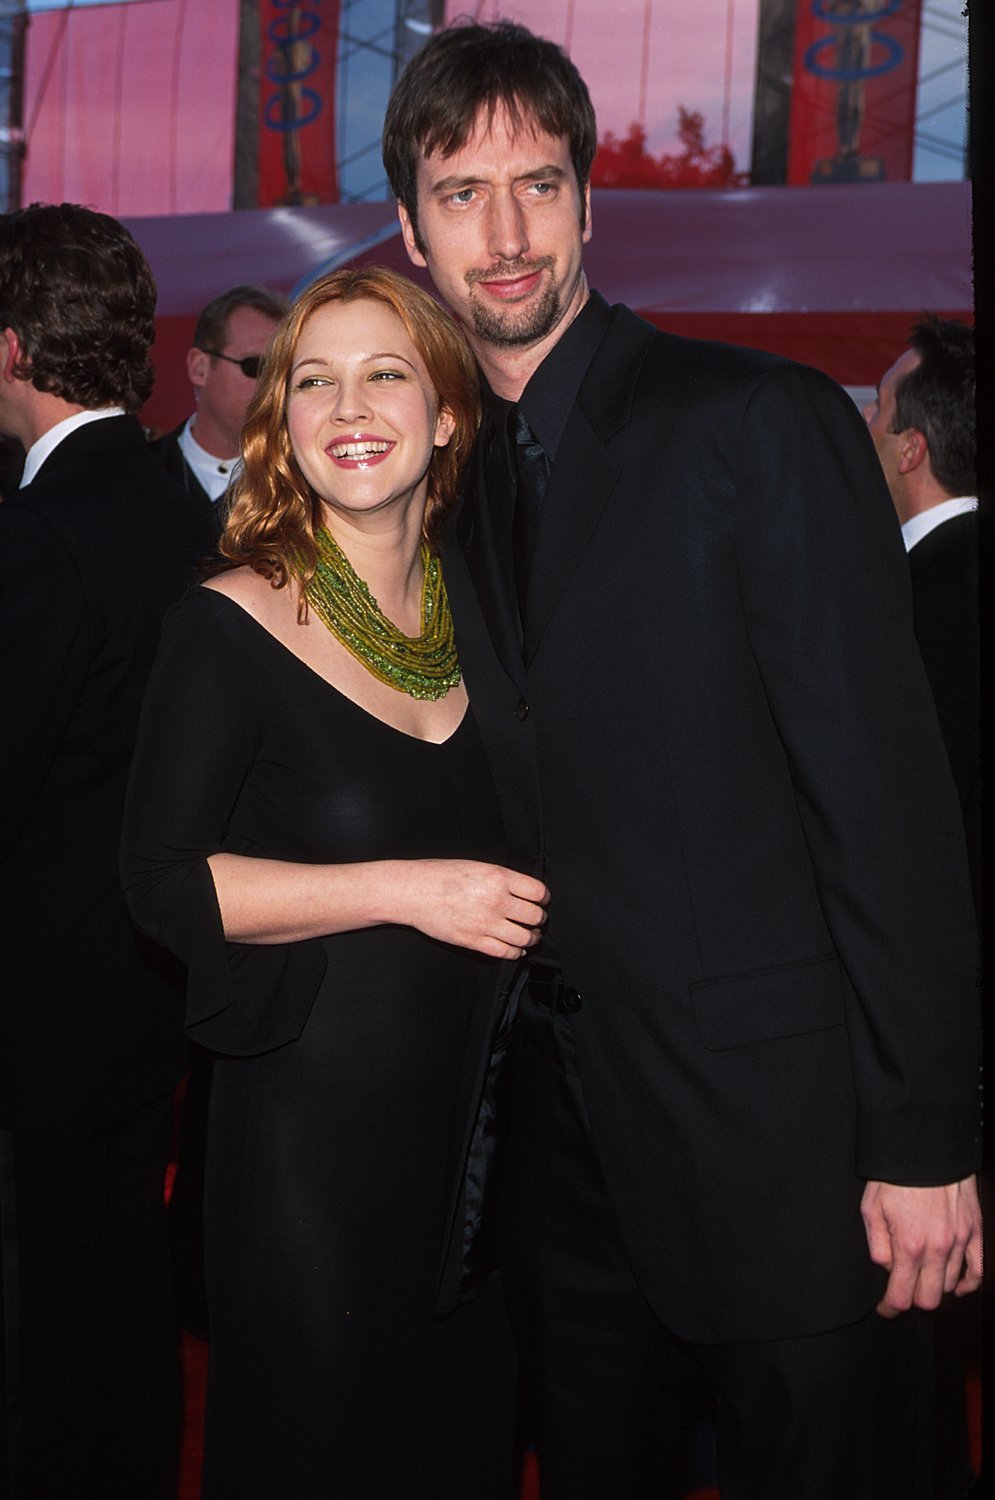 Tom Green and Drew Barrymore on March 26, 2000, in Los Angeles, California | Photo: Getty Images